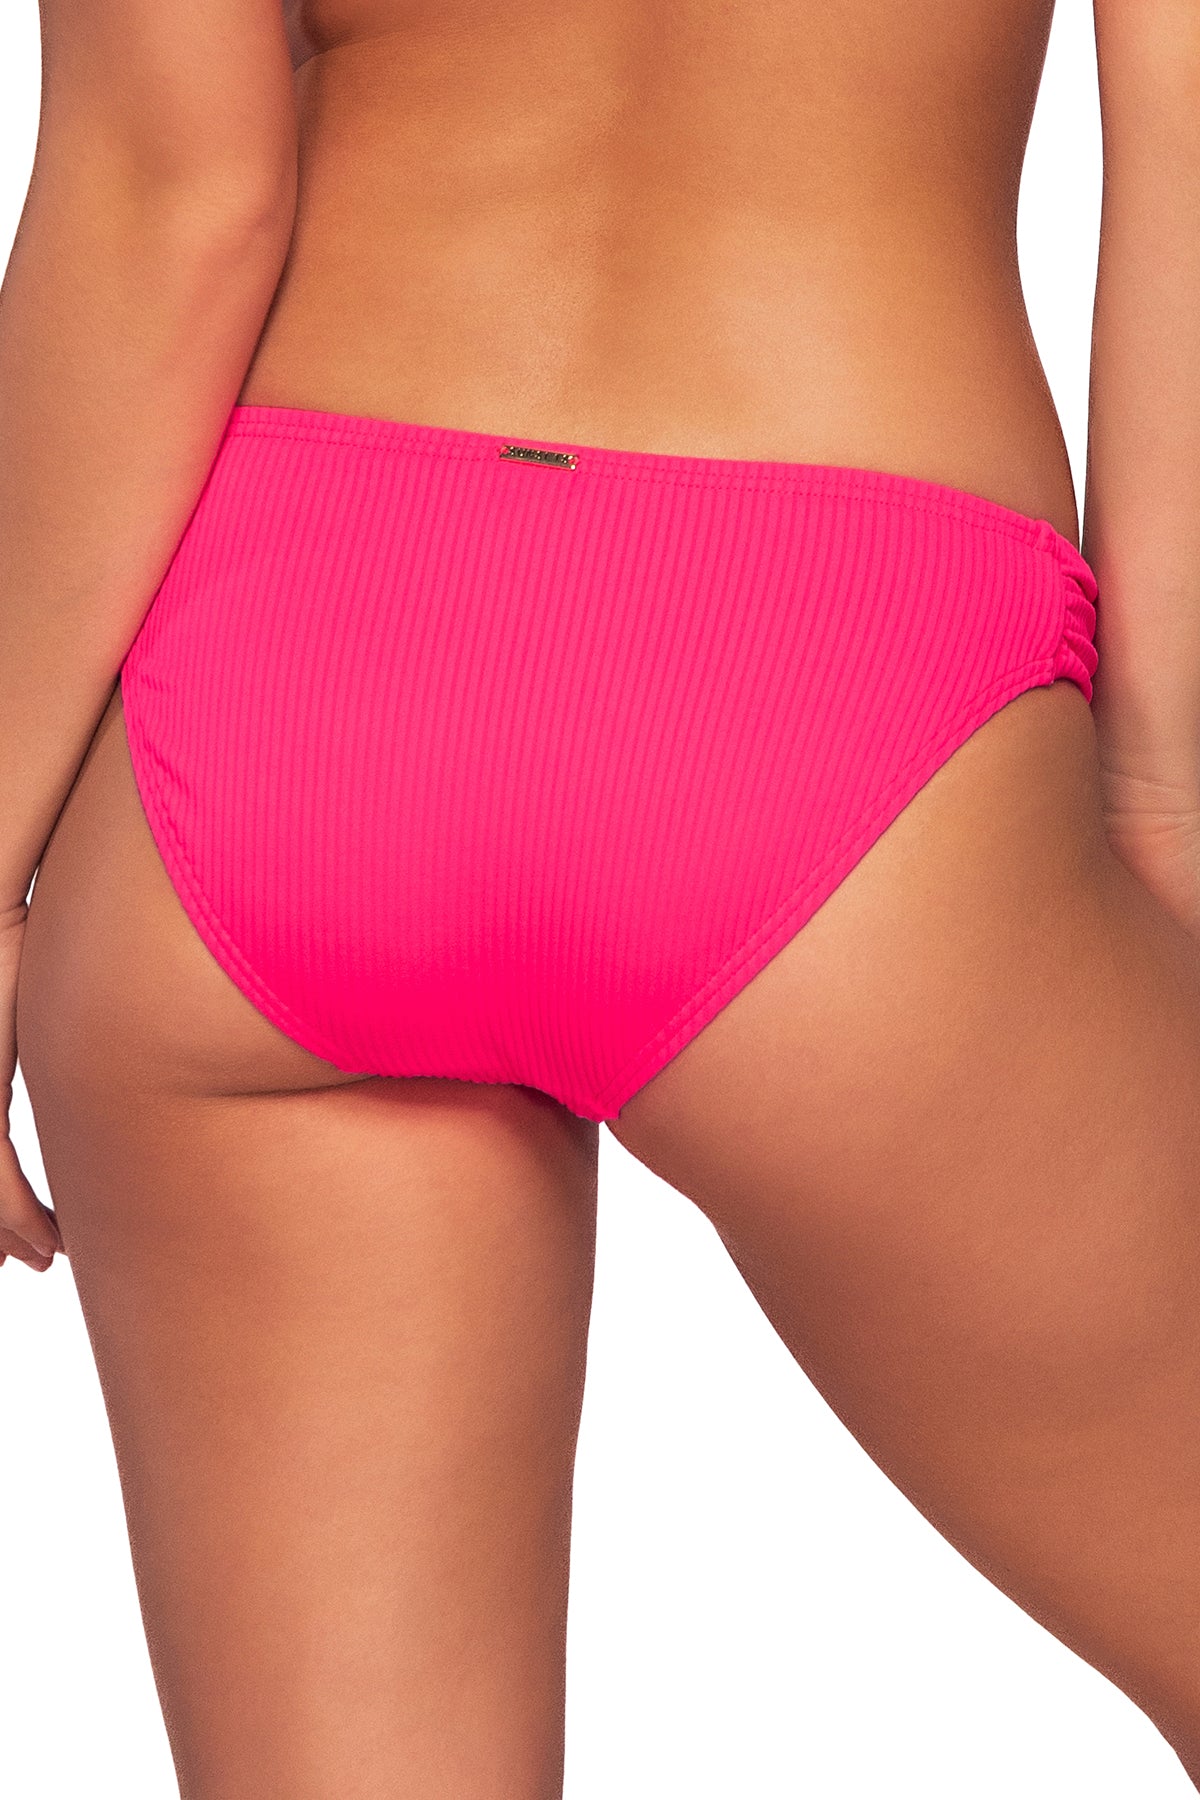 Back view of Sunsets Neon Pink Femme Fatale Hipster Bottom